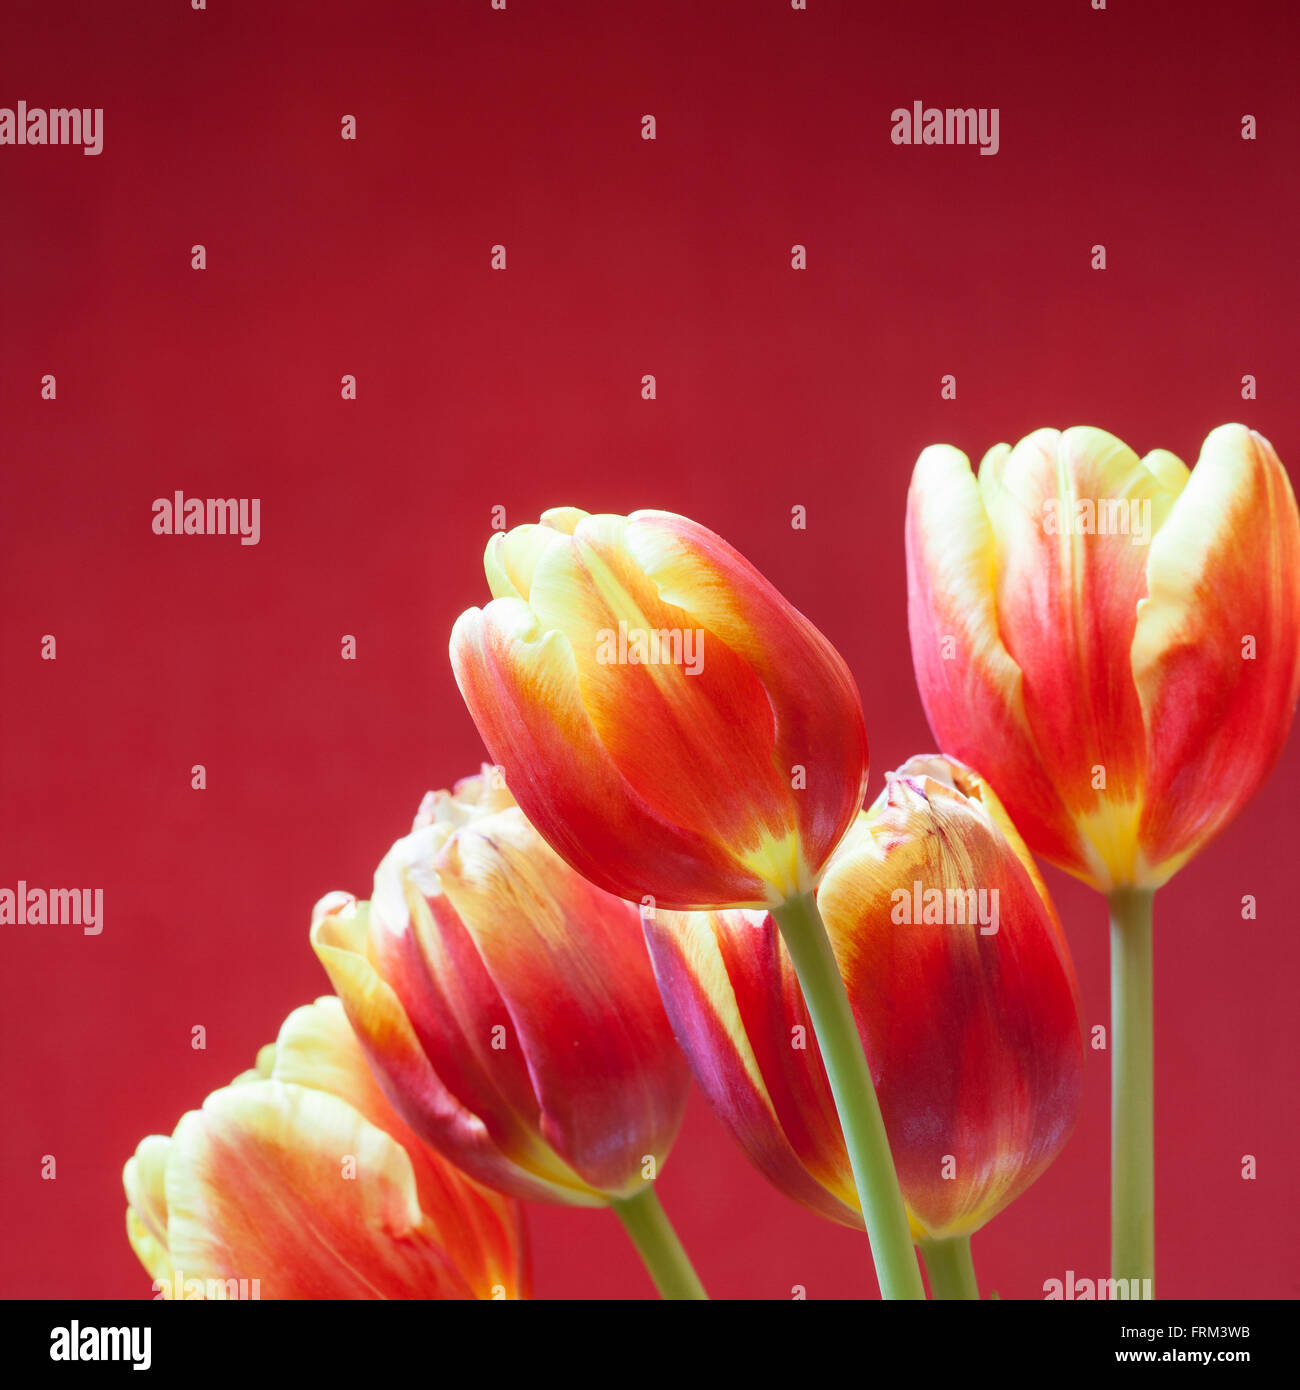 tulips on red background square image Stock Photo